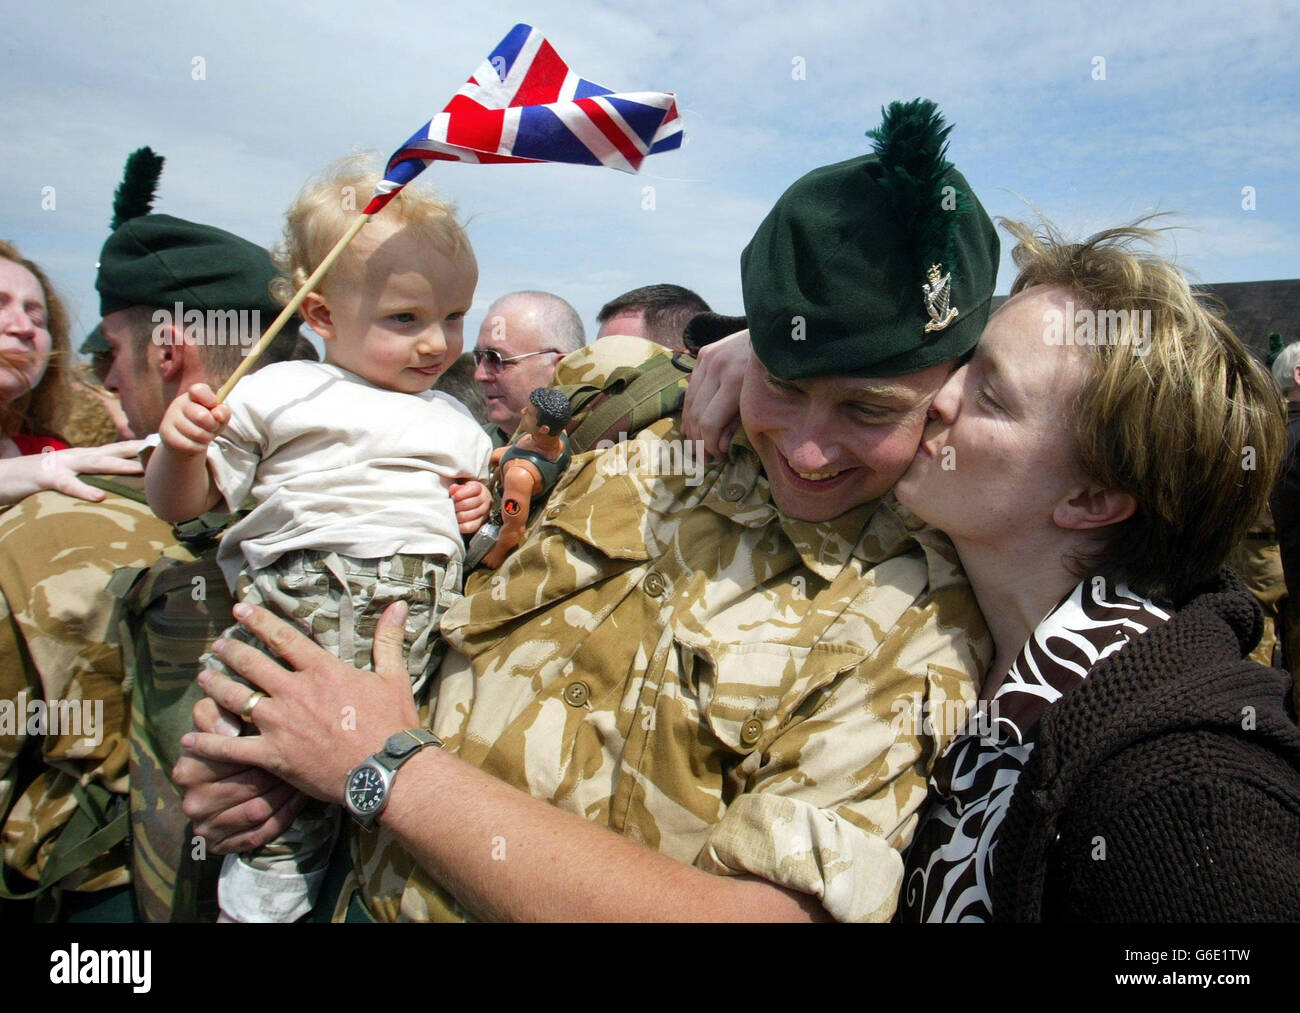 Ranger Mark Wooley from Newtownards Co Down, greets his 18 month old son, Steven, and wife Alison on arrival at RAF Aldergrove in Belfast. He was one of thirty-three soldiers from the Royal Irish Rangers, who guarded 16 Air Assault Brigade headquarters during the Gulf conflict. *..During the war they had earned huge respect from the Regular Army for the vital security work they carried out. Lieutenant Colonel Andrew McCord, commanding officer of the Royal Irish Rangers, said officers had been unable to distinguish between full-time and TA soldiers during the war. Stock Photo